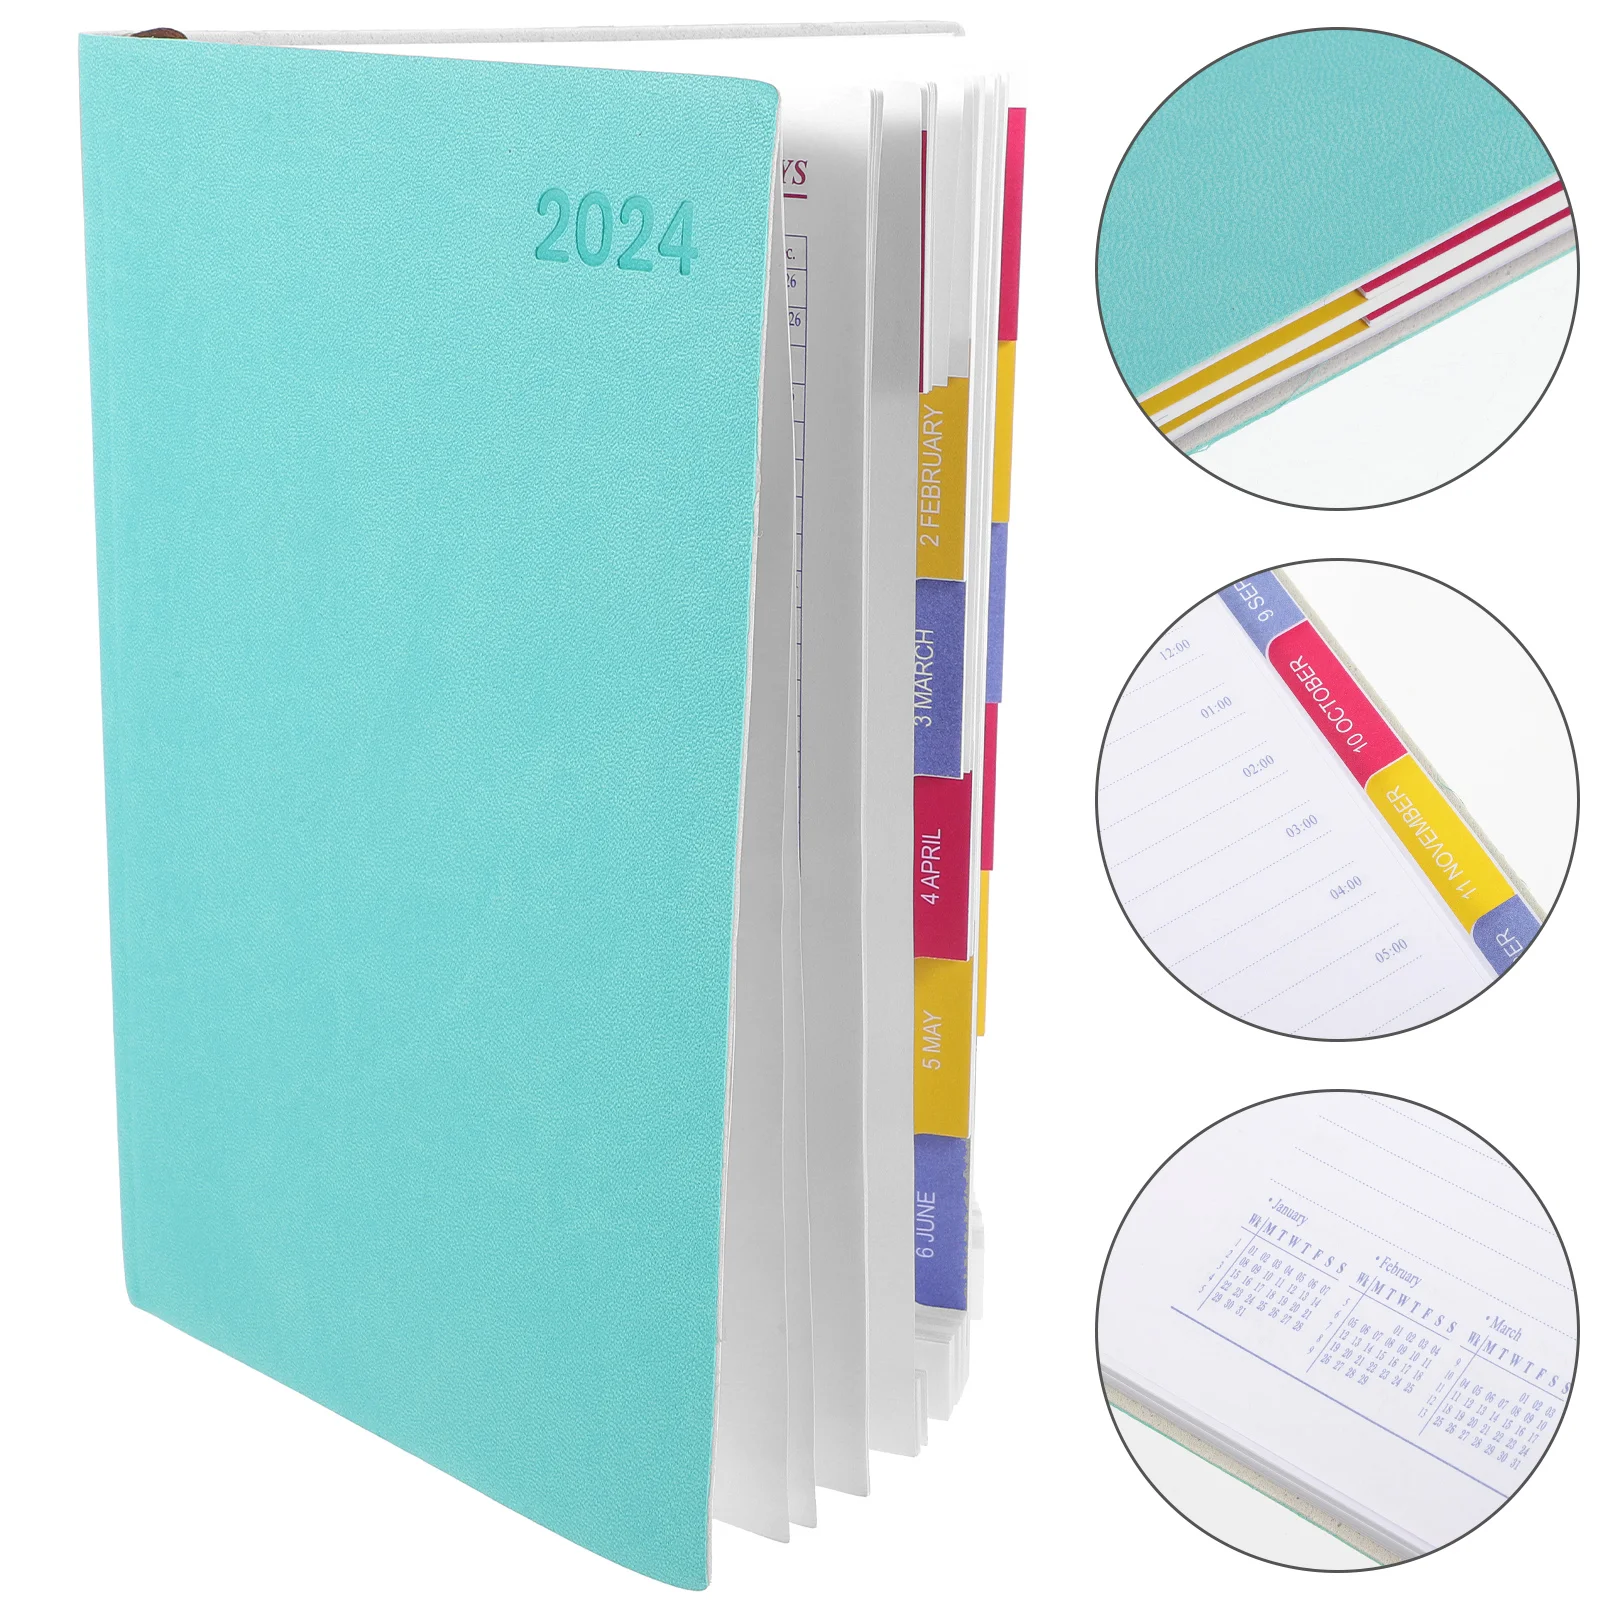 

2024 Agenda Book Weekly Monthly Planner Daily Undated Delicate Notebook Journal Notepad Work 2023/24